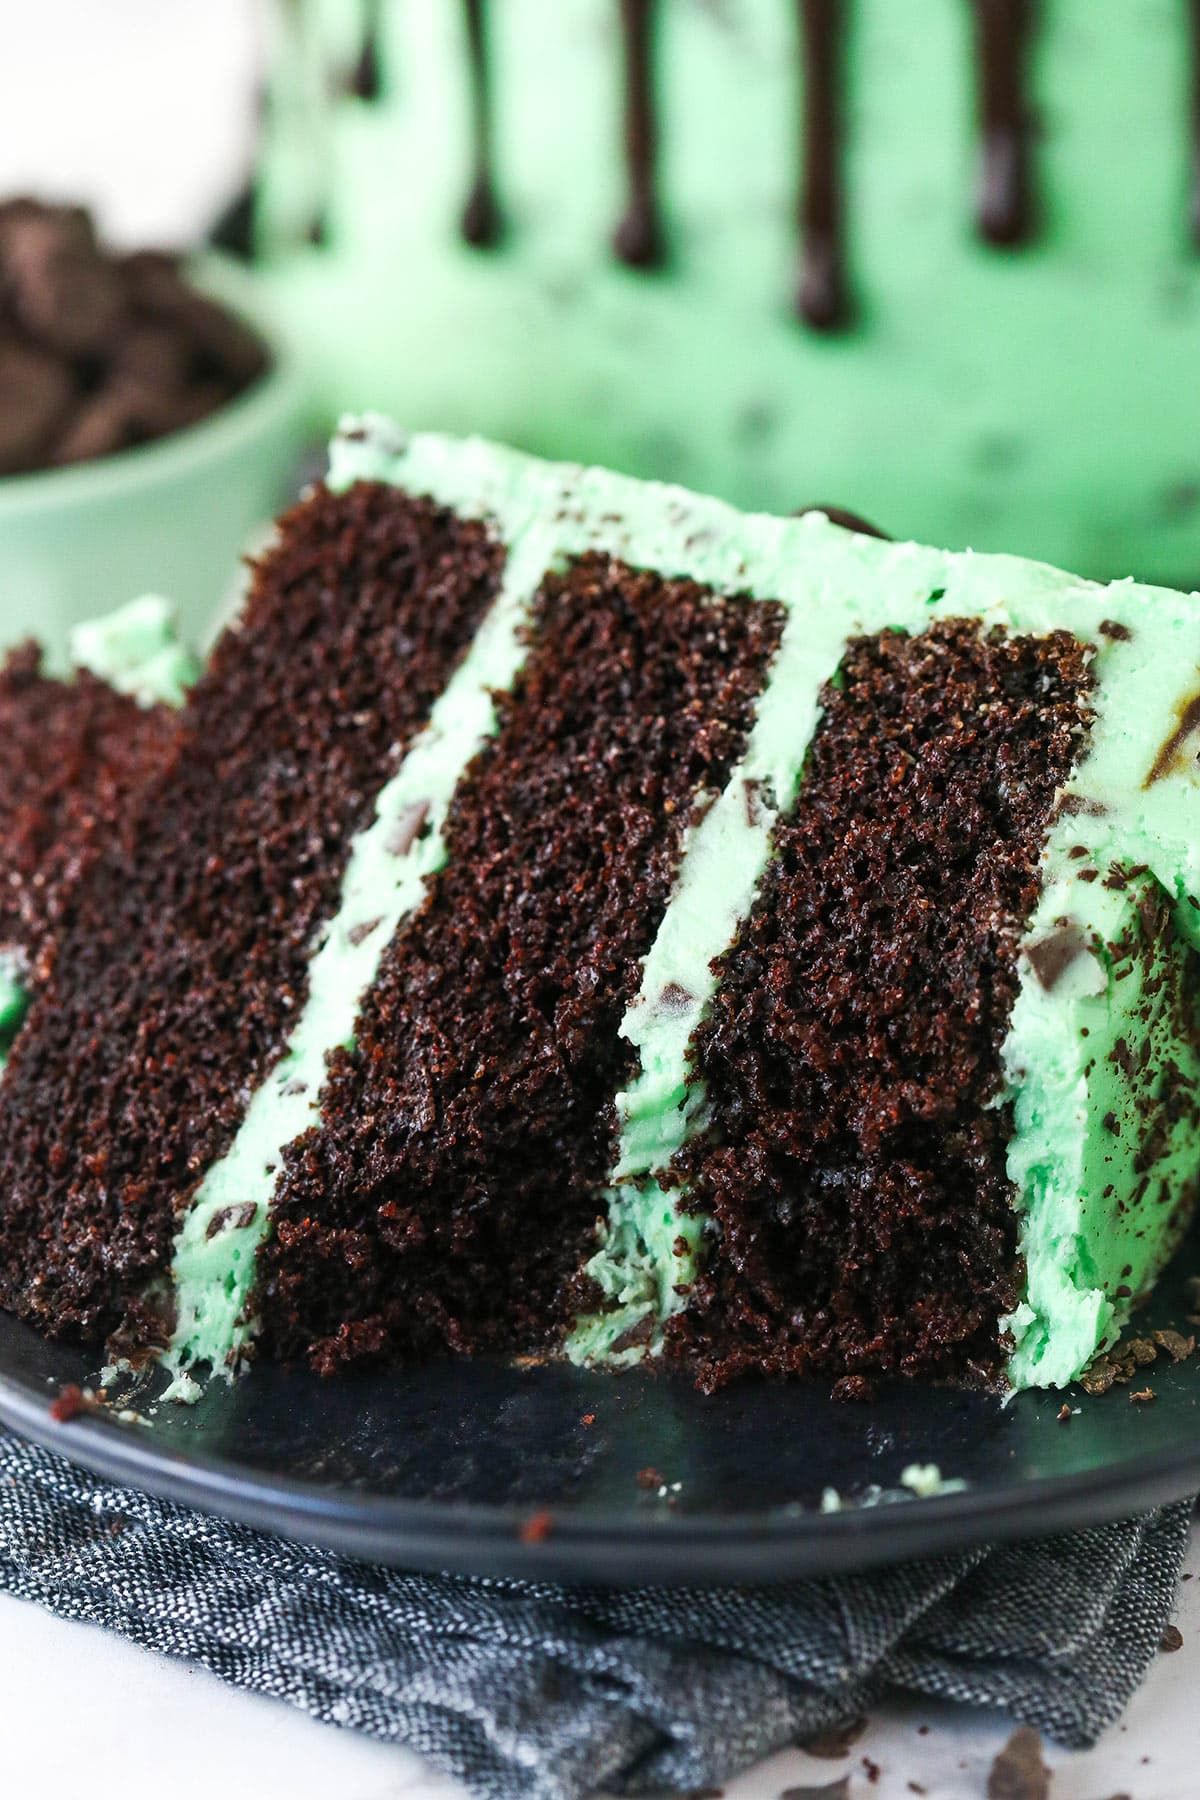 A slice of mint chocolate cake on a plate with a bite taken out of it.